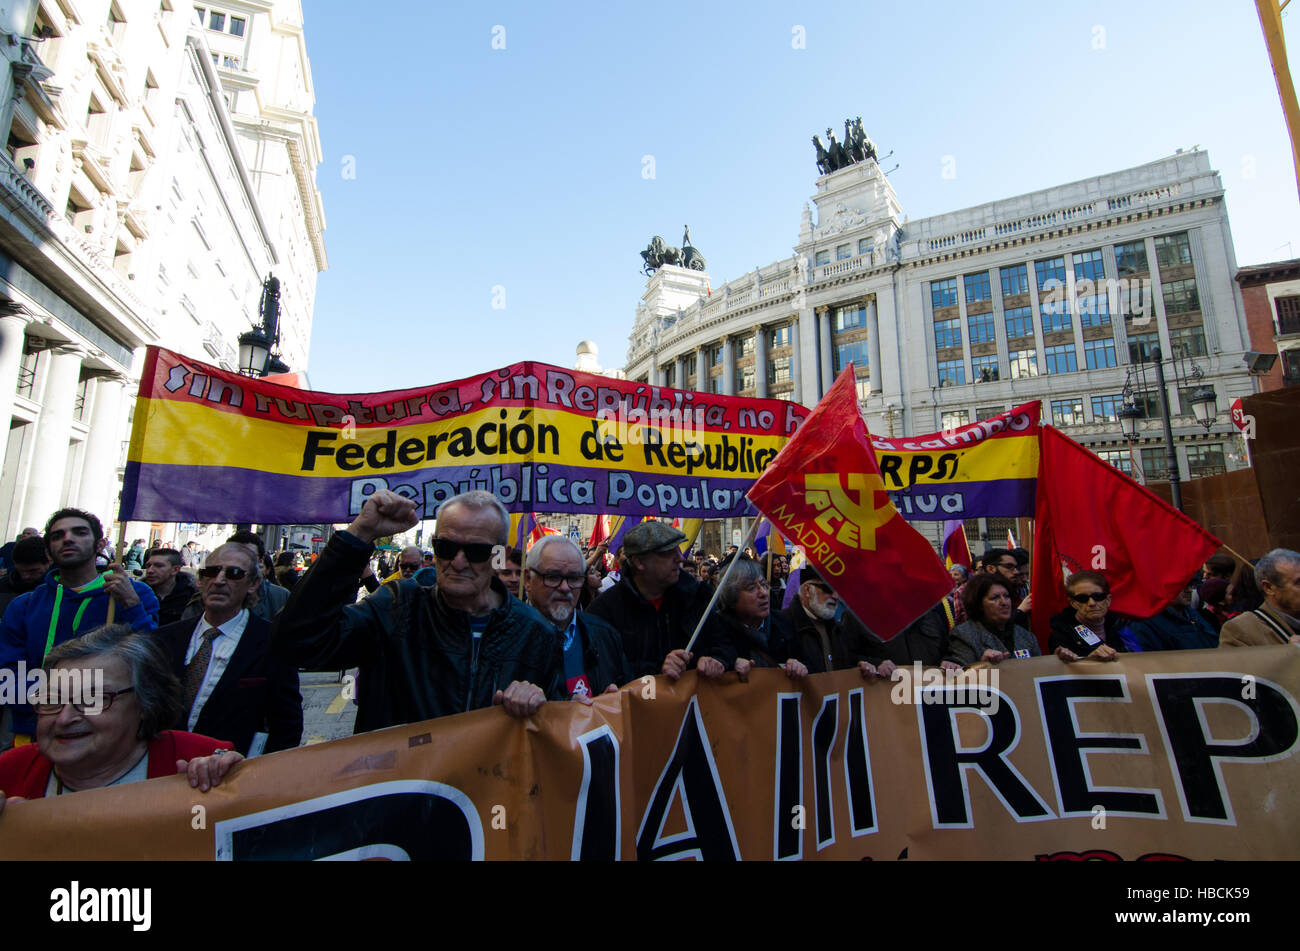 Madrid, Spain. 6th December, 2016. Main banner of the demonstration claiming for the 3rd Spanish Republic and against monarchy during the Constitution Day in Spain. Credit:  Valentin Sama-Rojo/Alamy Live News. Stock Photo